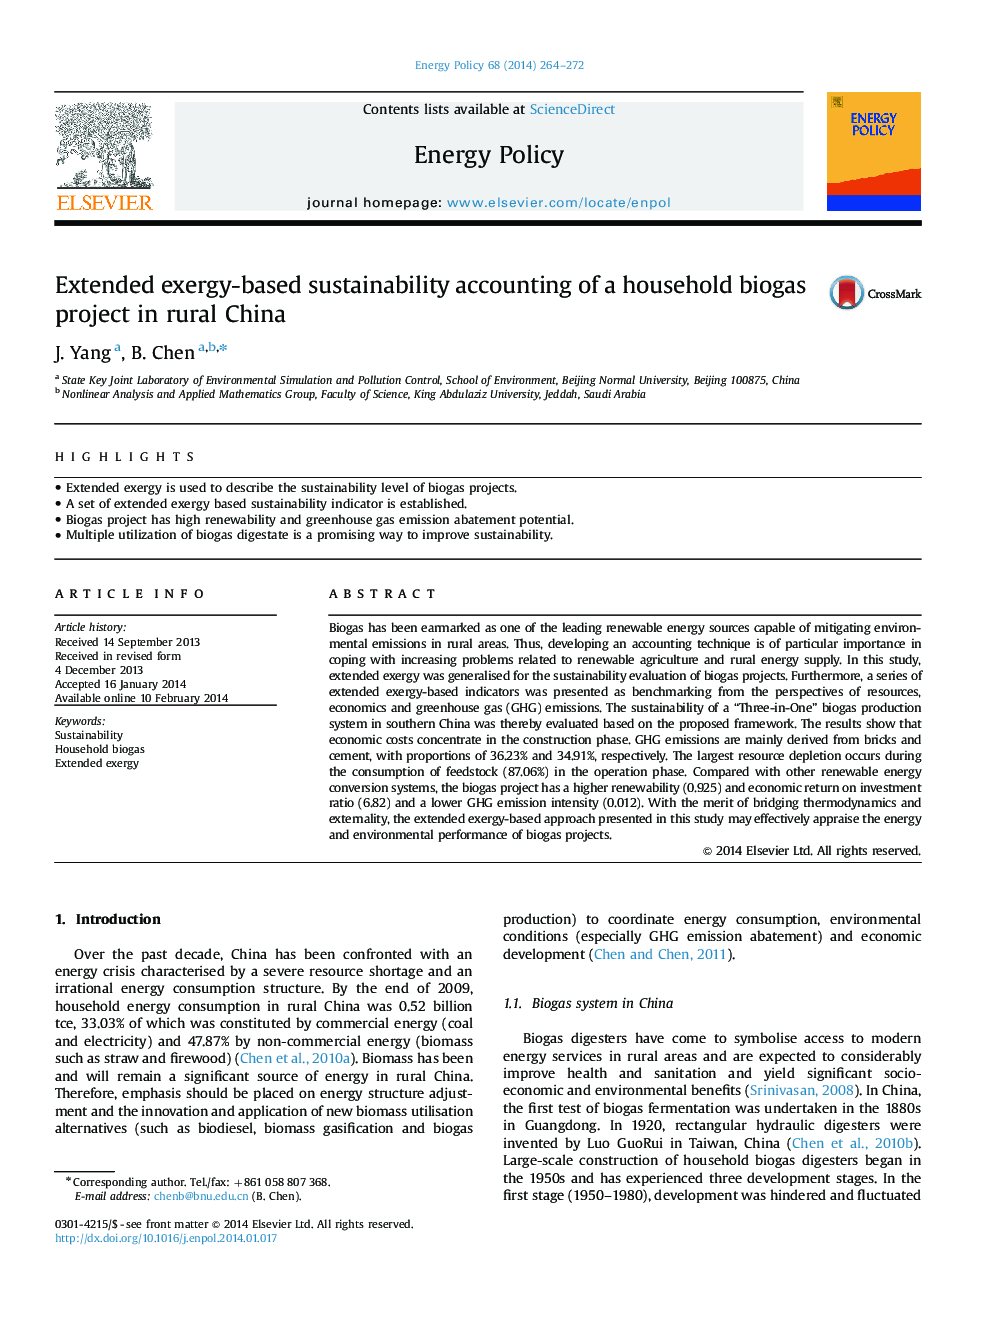 Extended exergy-based sustainability accounting of a household biogas project in rural China